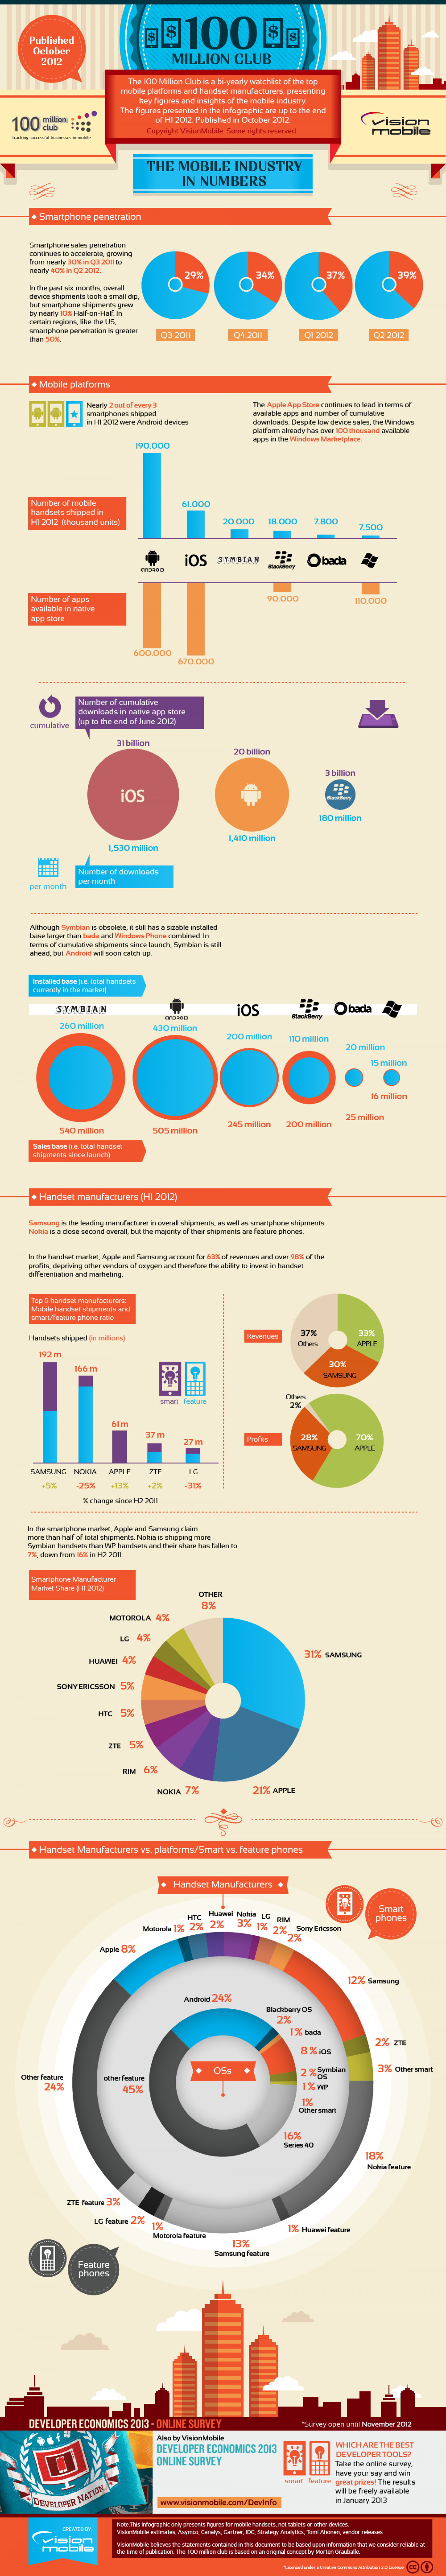 Mobile Industry in Numbers Infographic